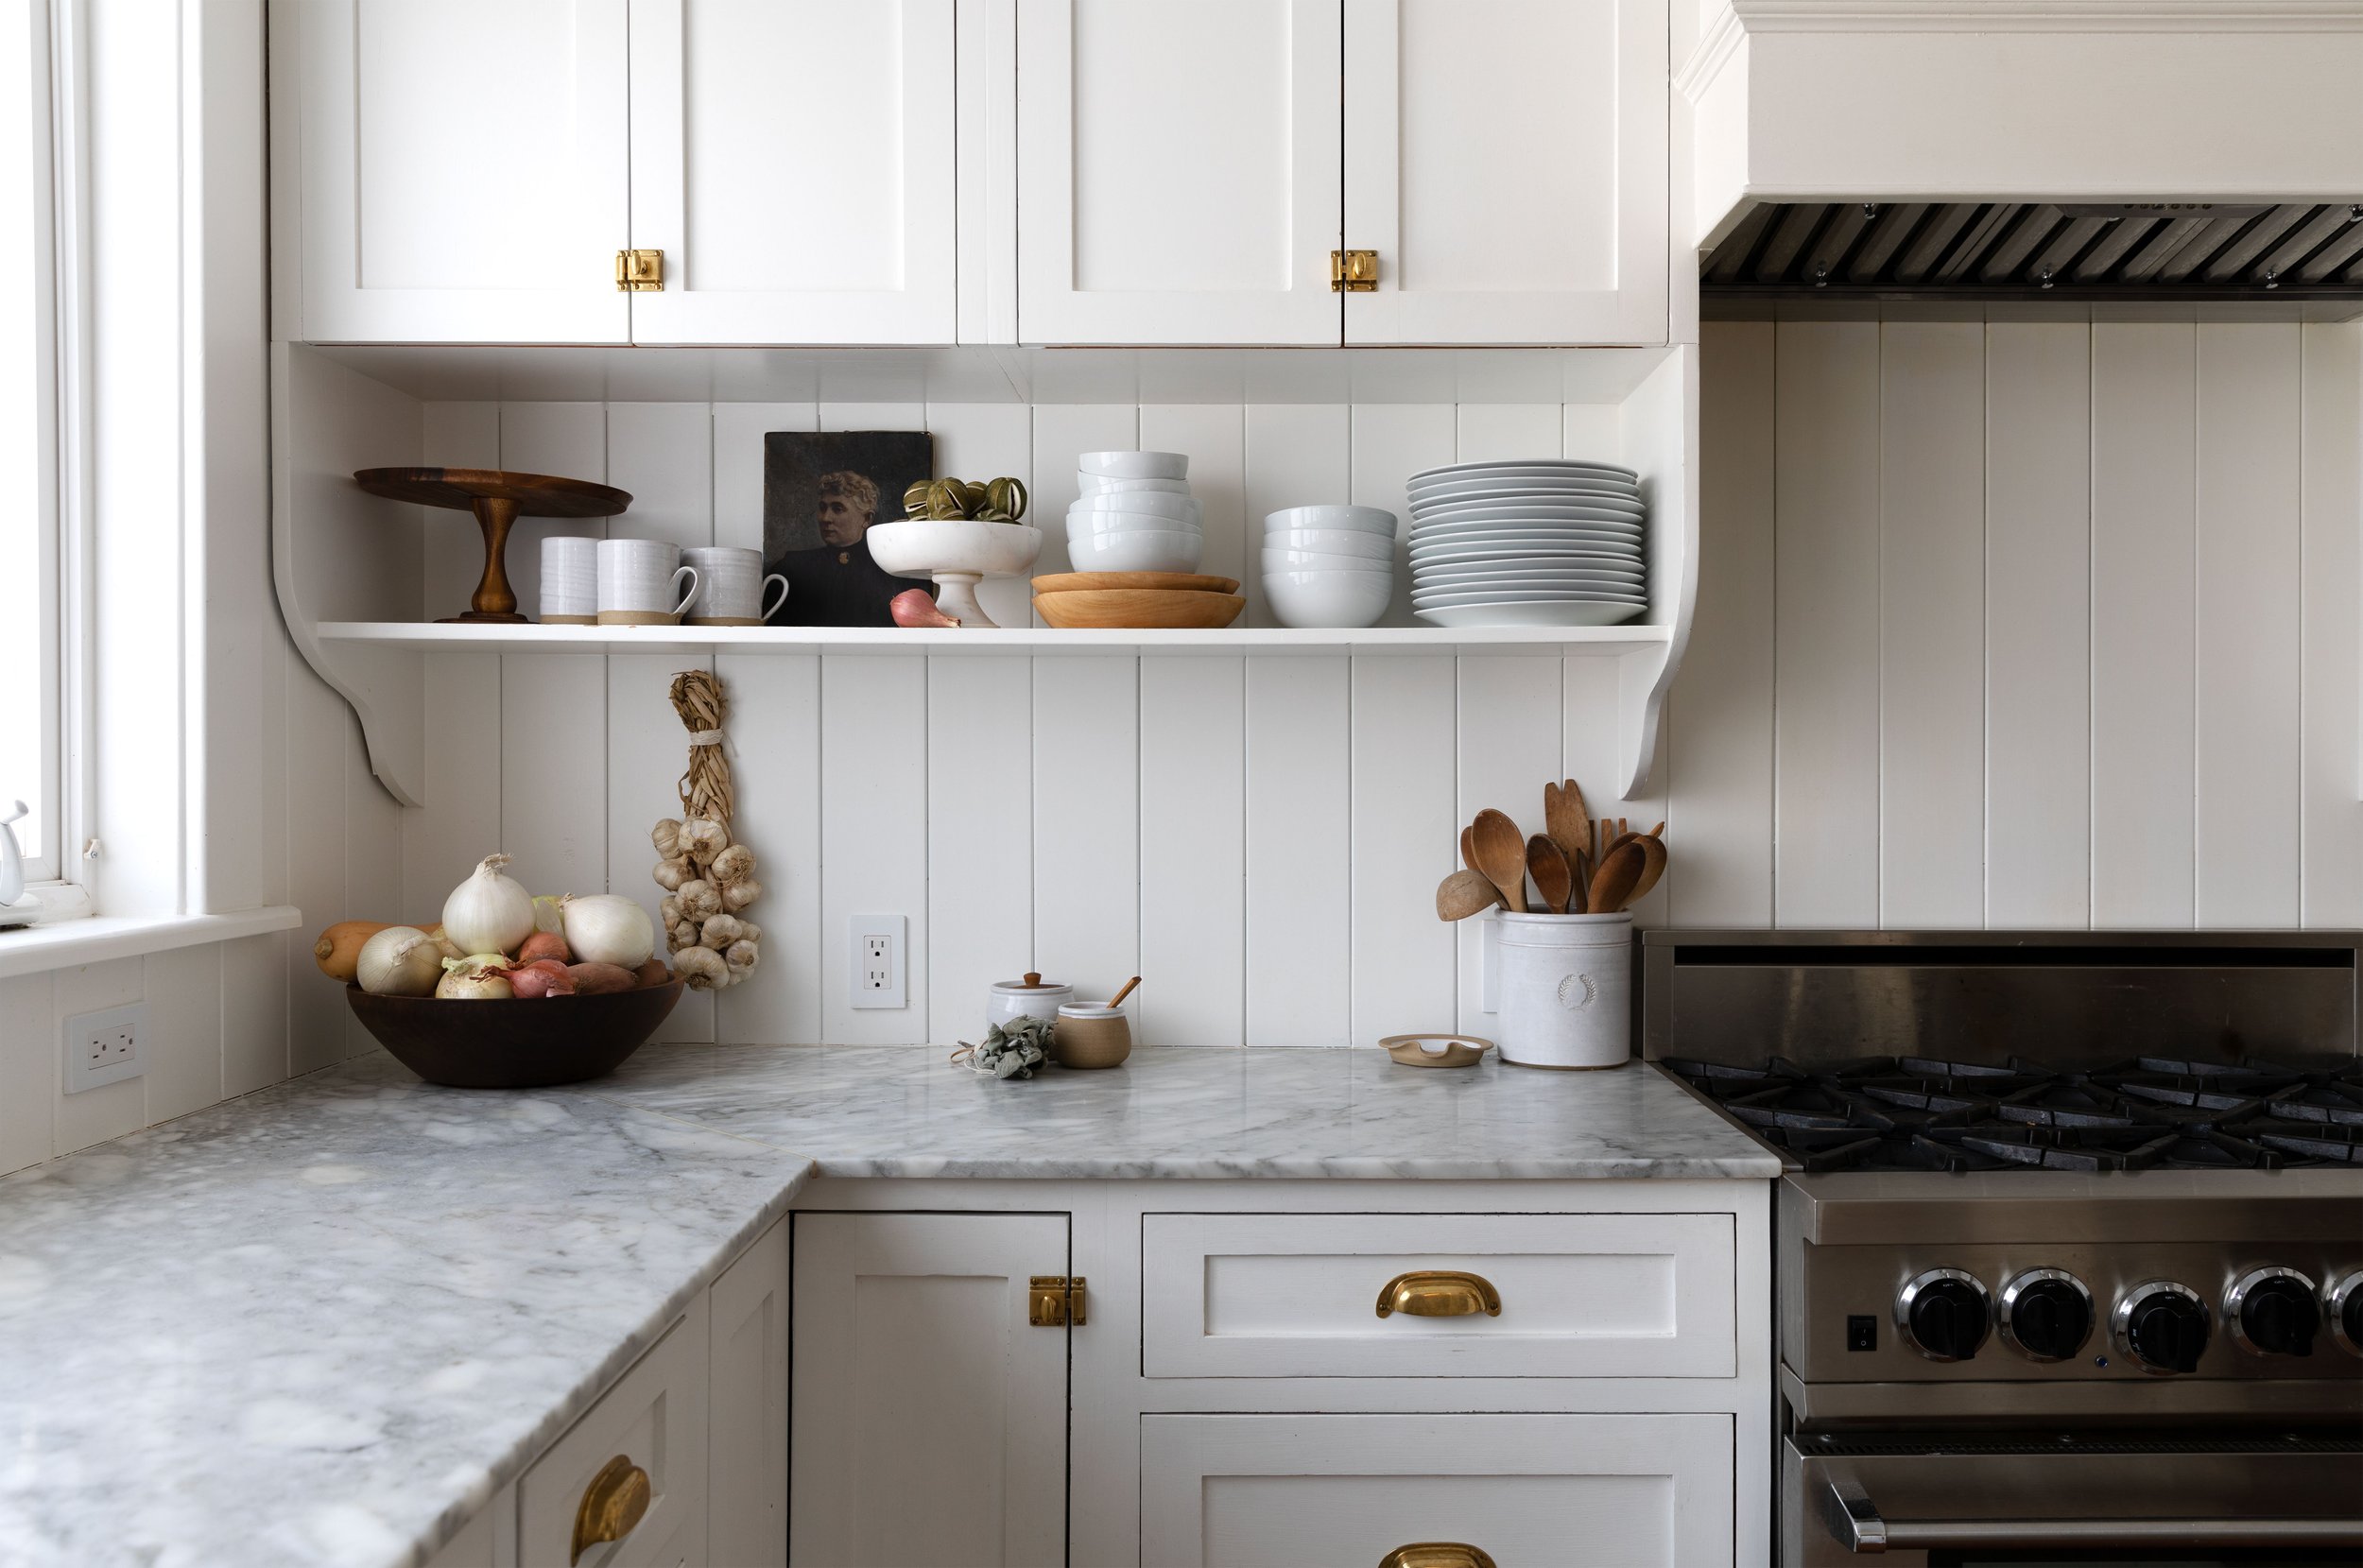 Kitchen Envy - A lovely example of a V groove panel